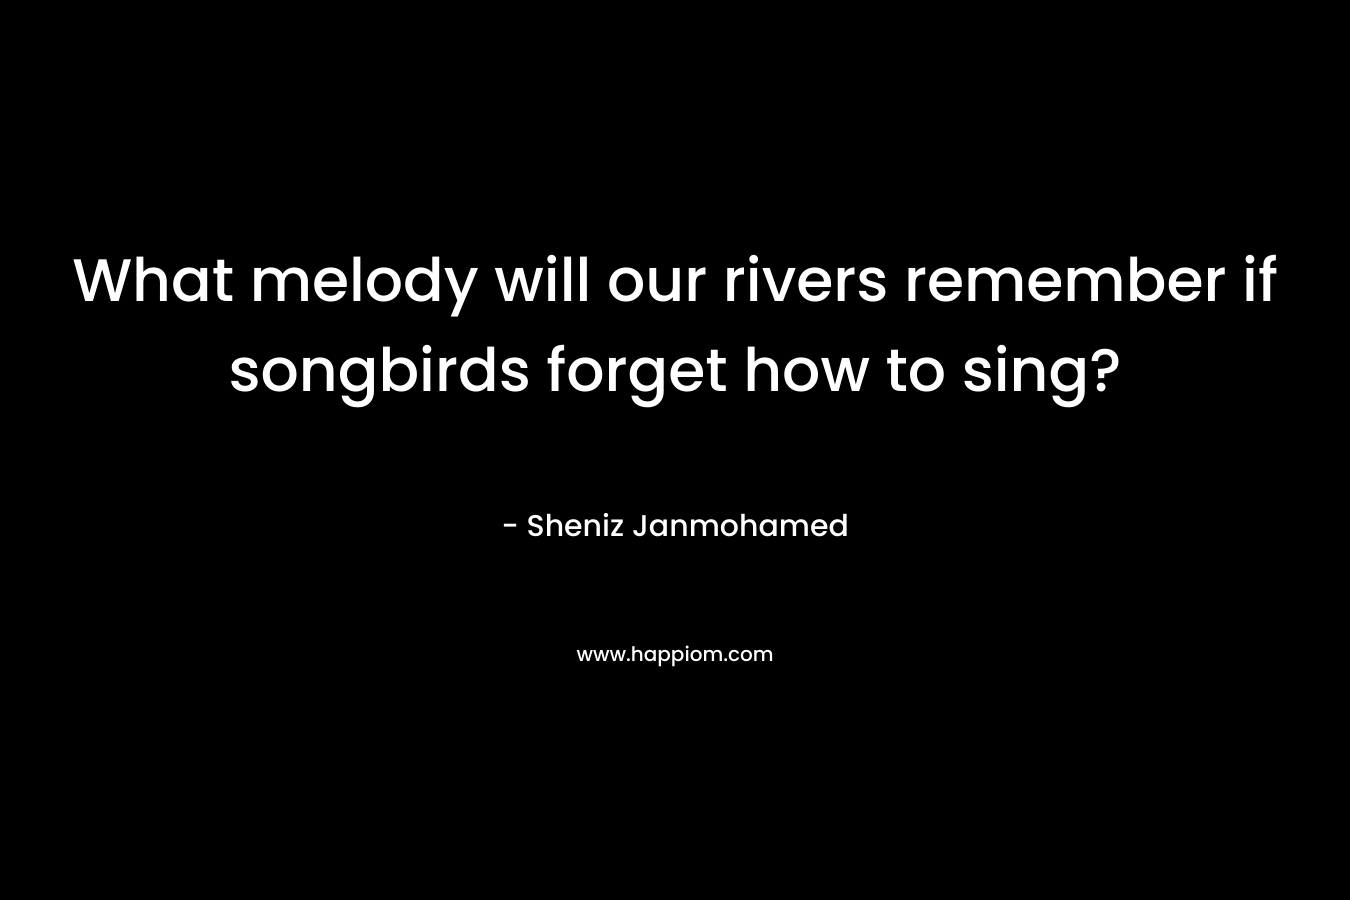 What melody will our rivers remember if songbirds forget how to sing? – Sheniz Janmohamed